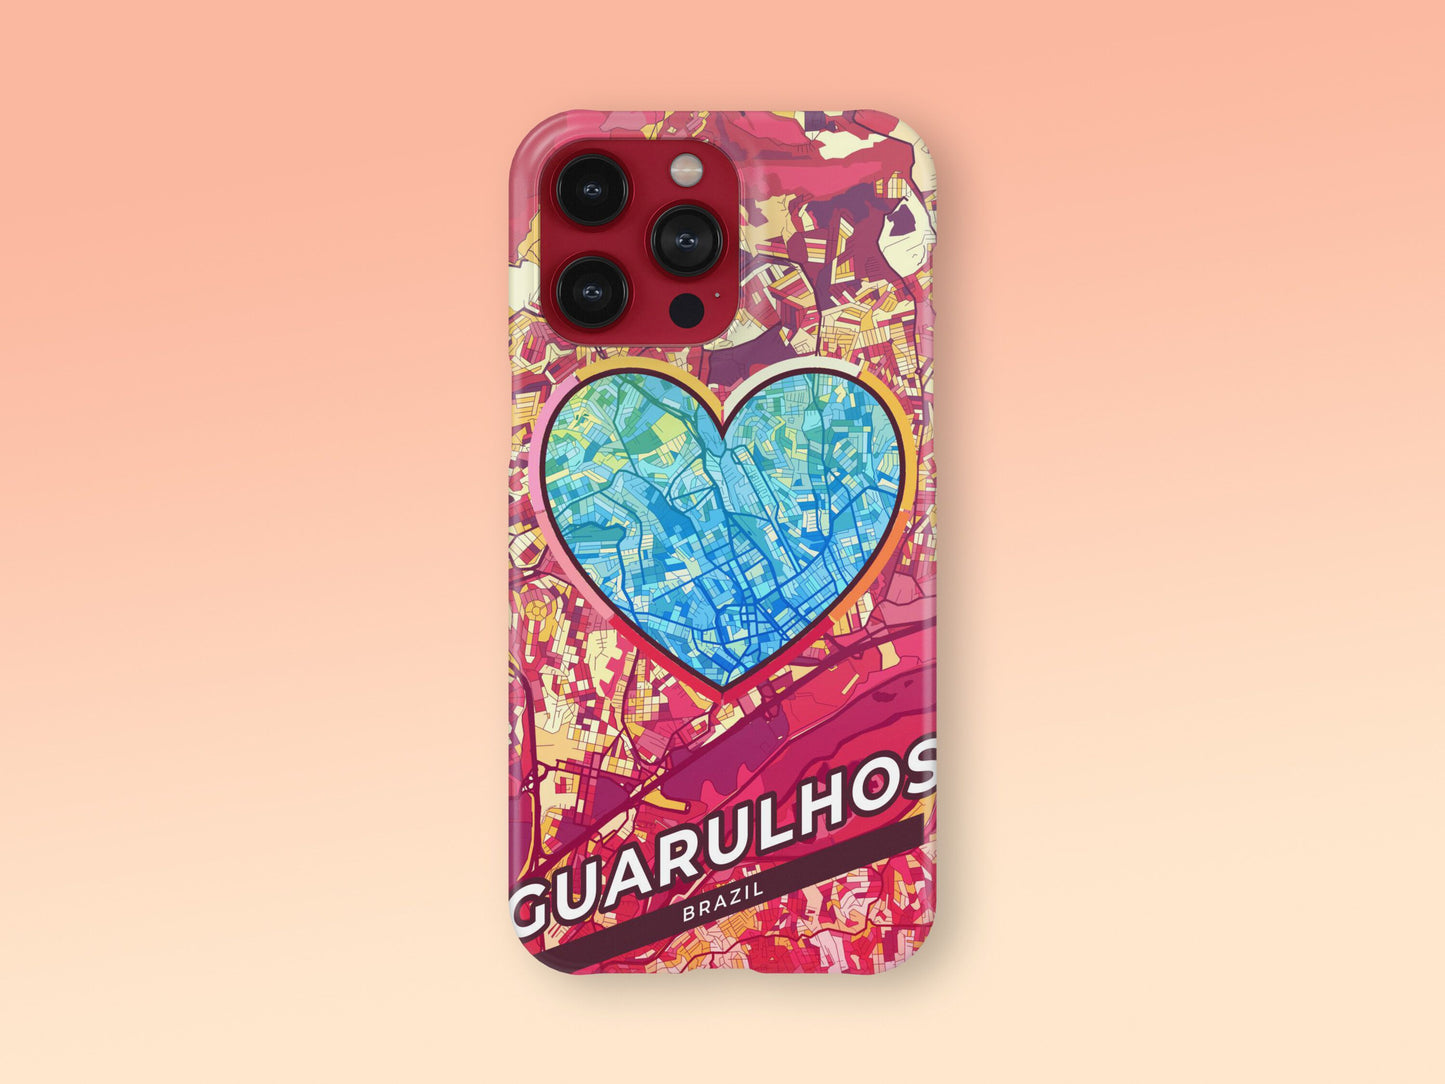 Guarulhos Brazil slim phone case with colorful icon. Birthday, wedding or housewarming gift. Couple match cases. 2